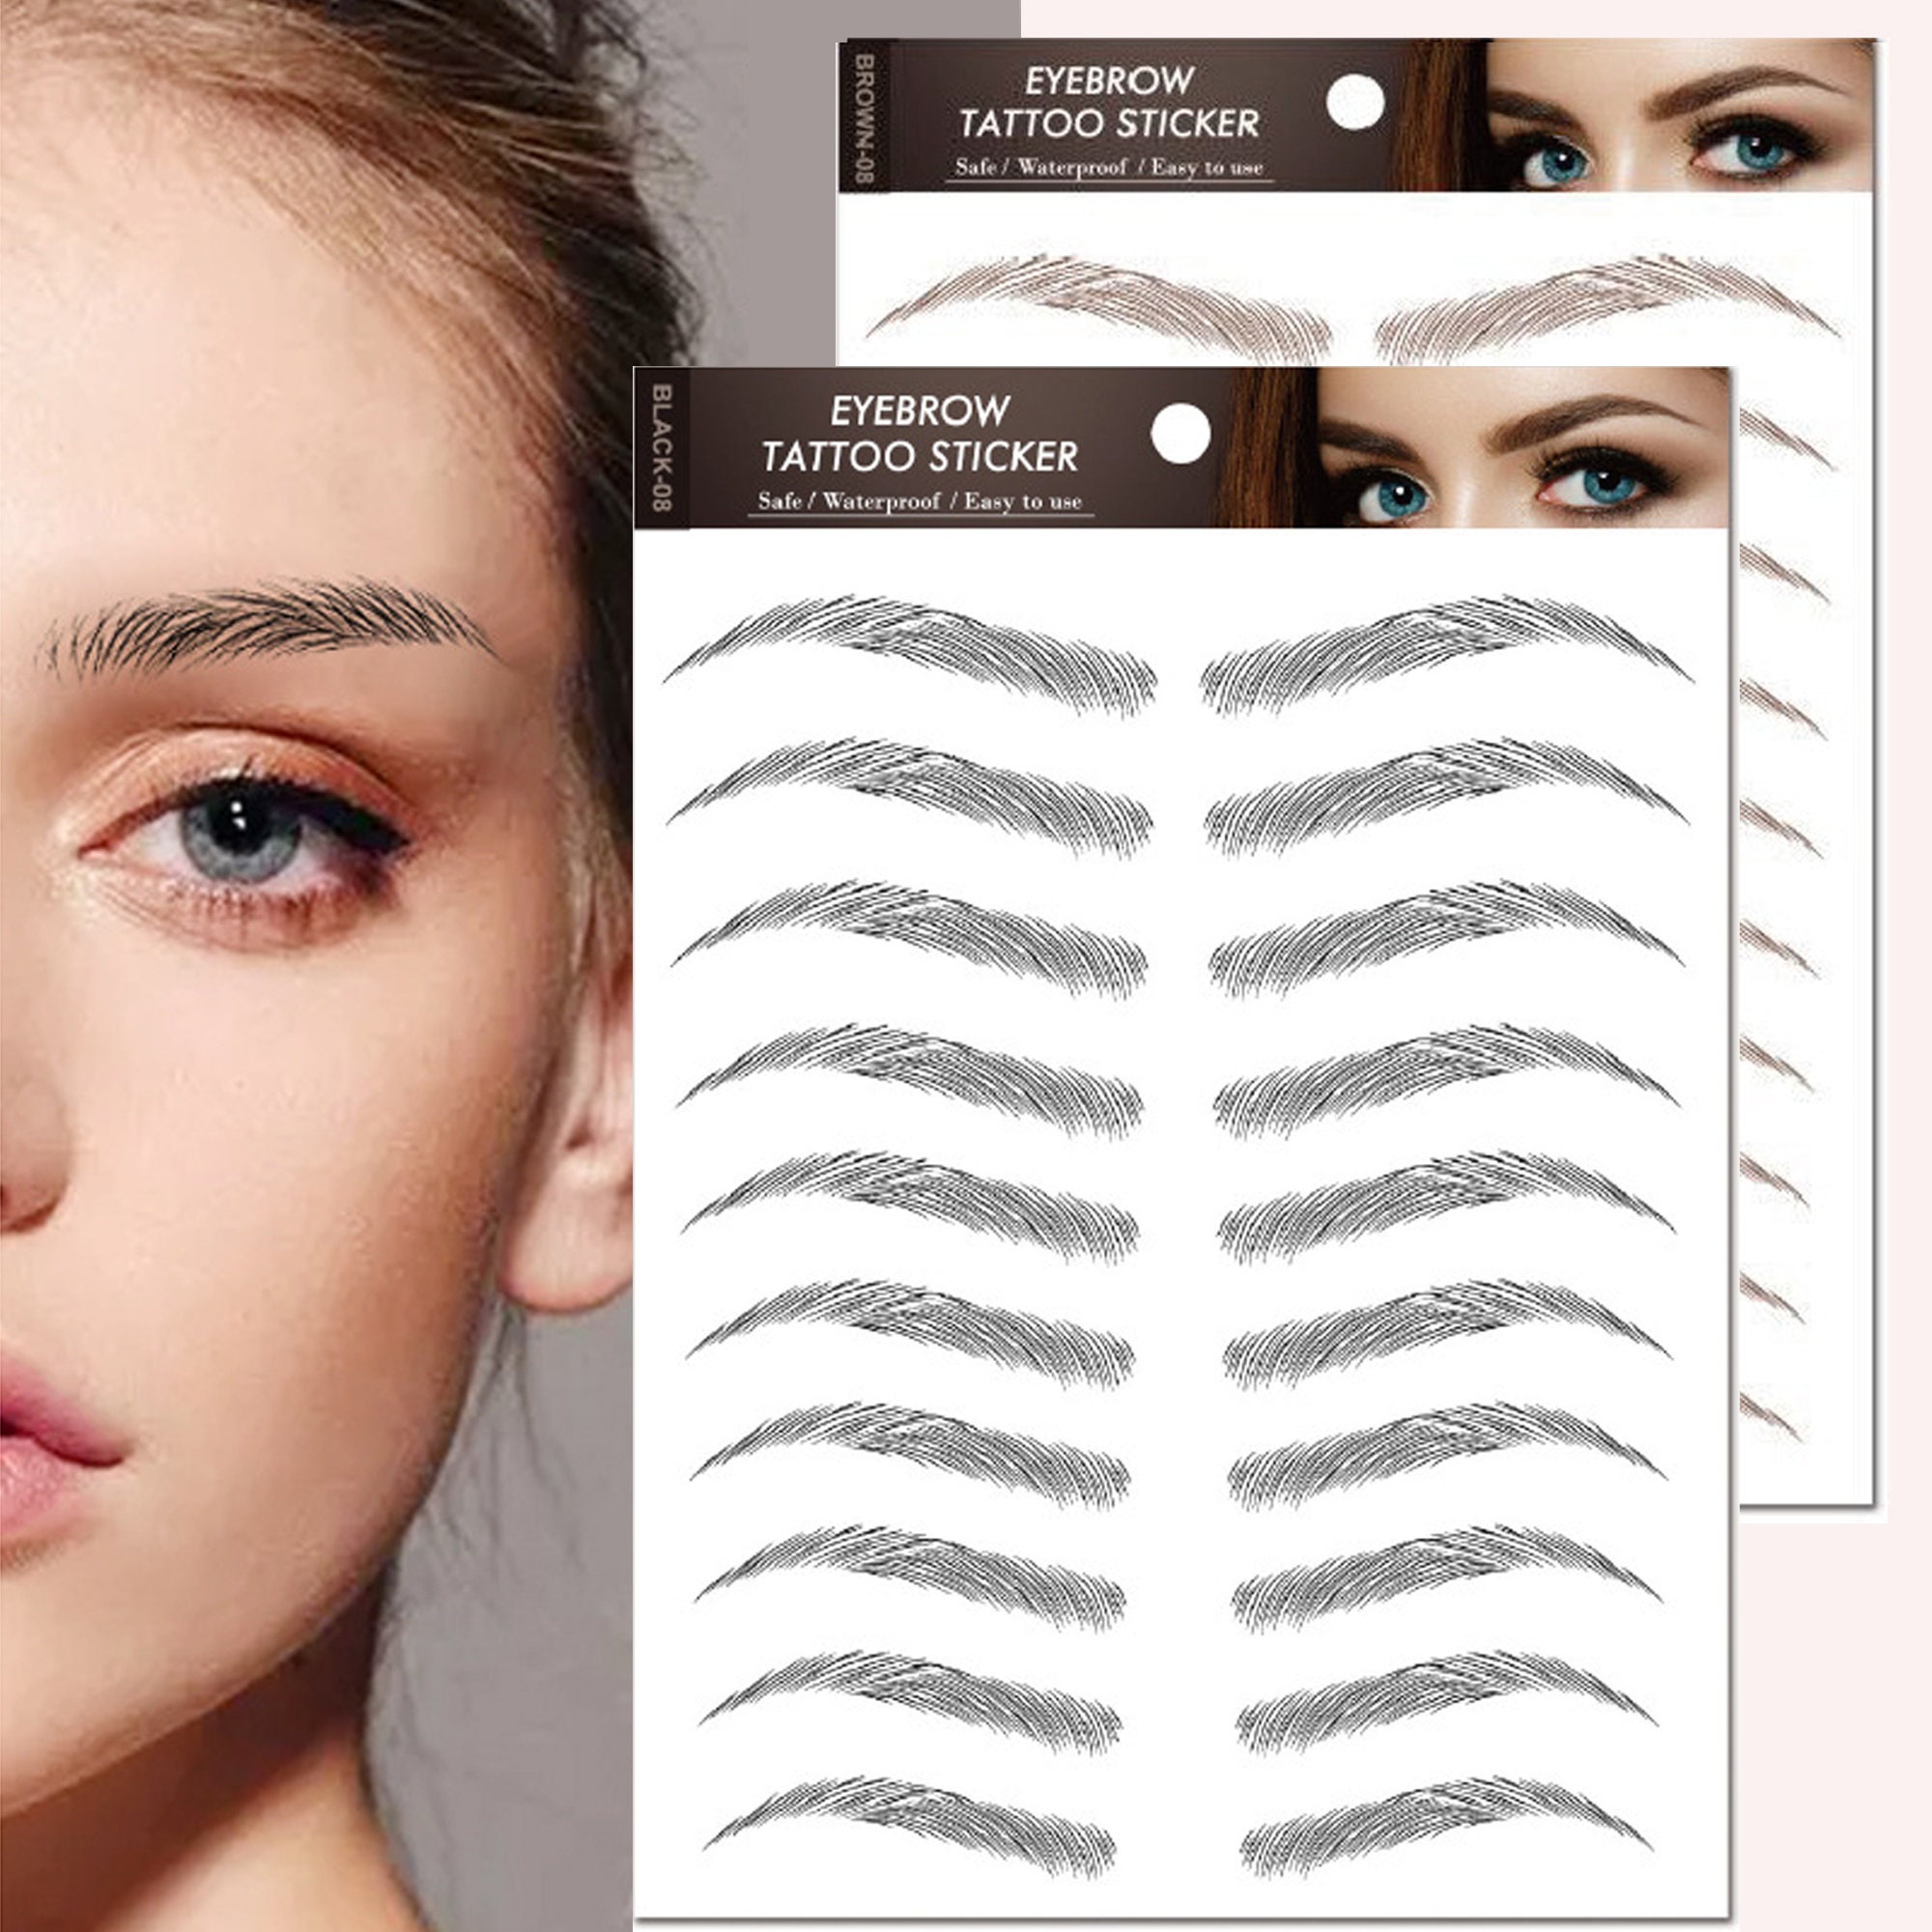 Eyebrow tattoo aftercare and eyebrow tattoo healing stages  Elite Look